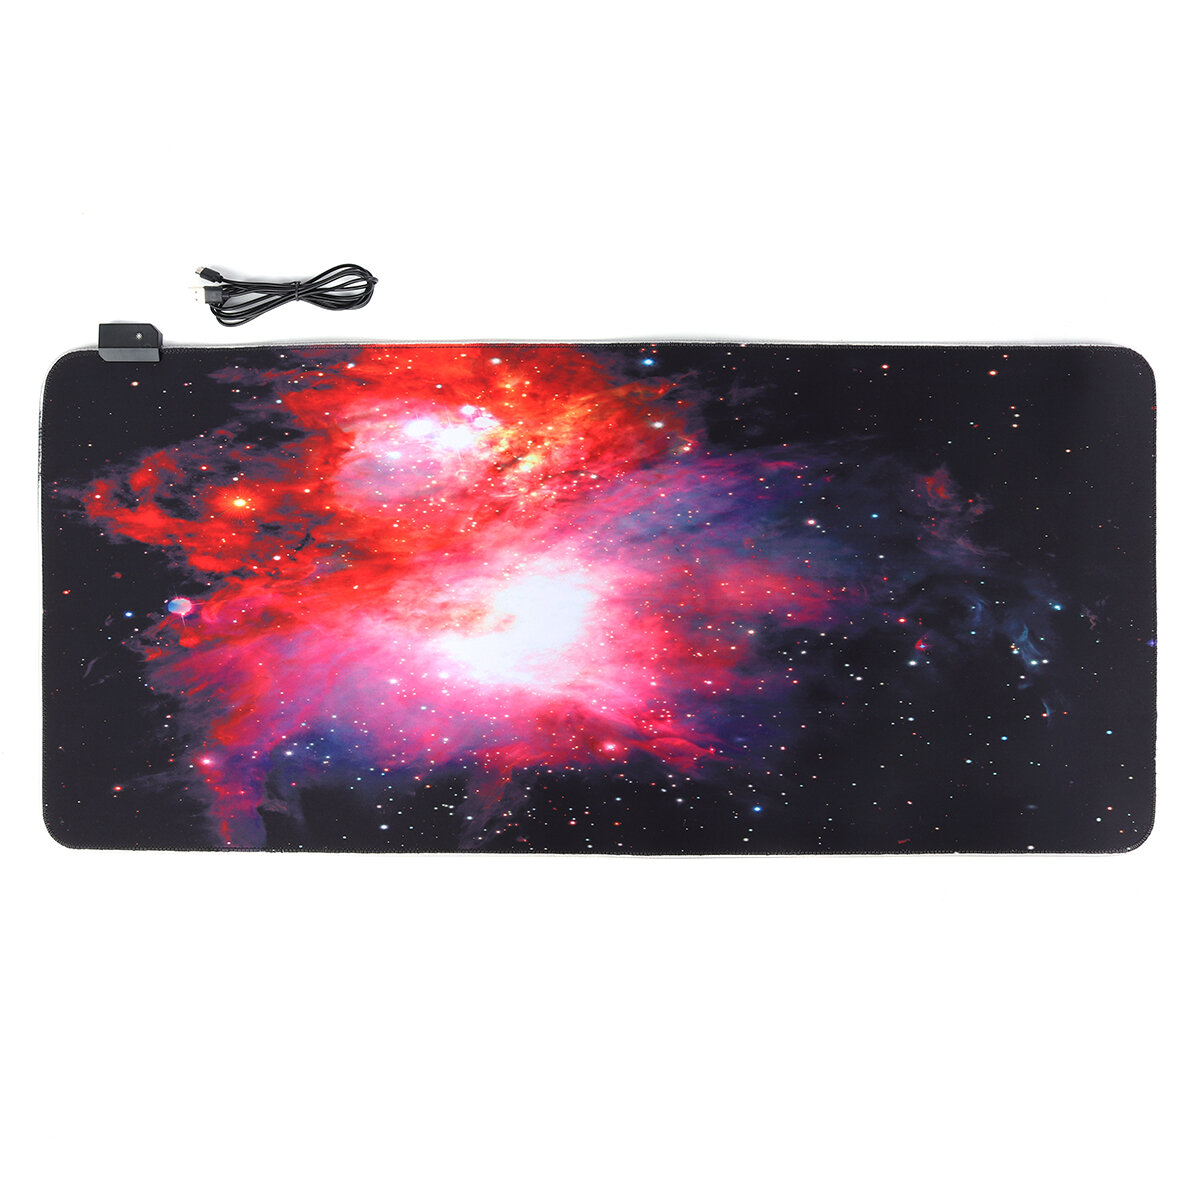 

Starry Sky RGB Mouse Pad Soft Rubber Anti-slip LED Illuminated Gaming Keyboard Pad Desktop Table Protective Mat for Home